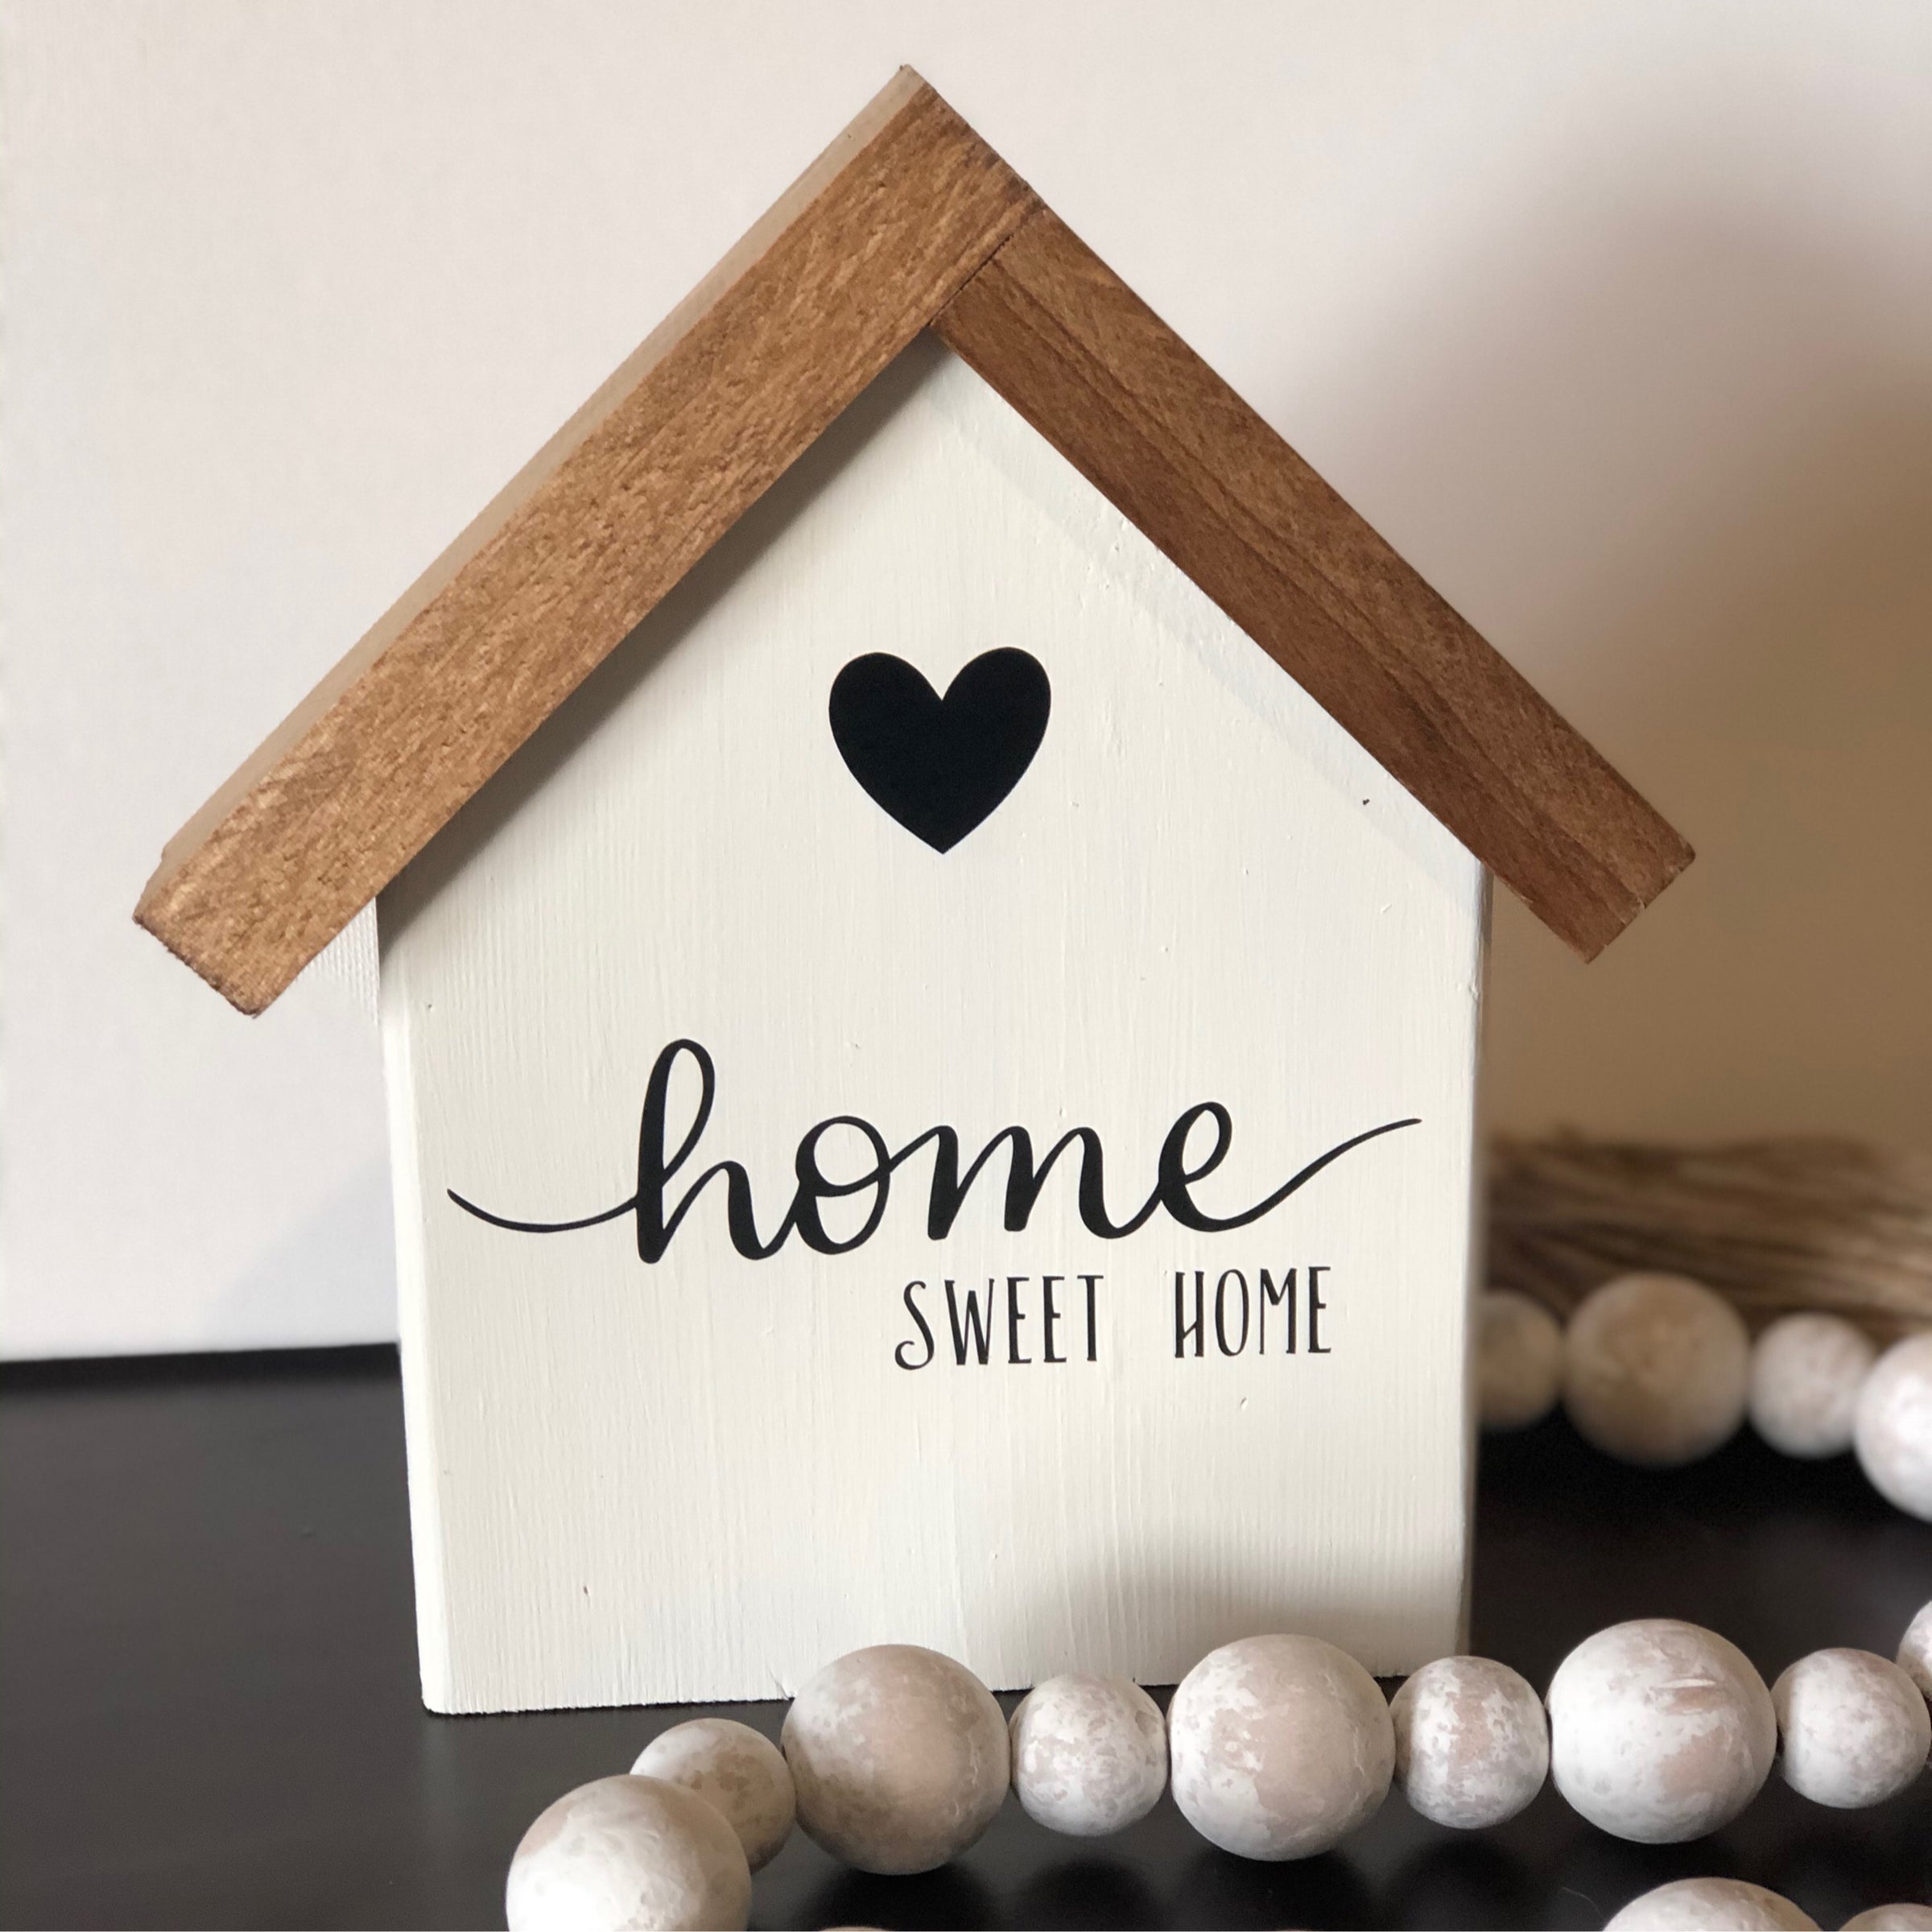 Home Sweet Home : Online